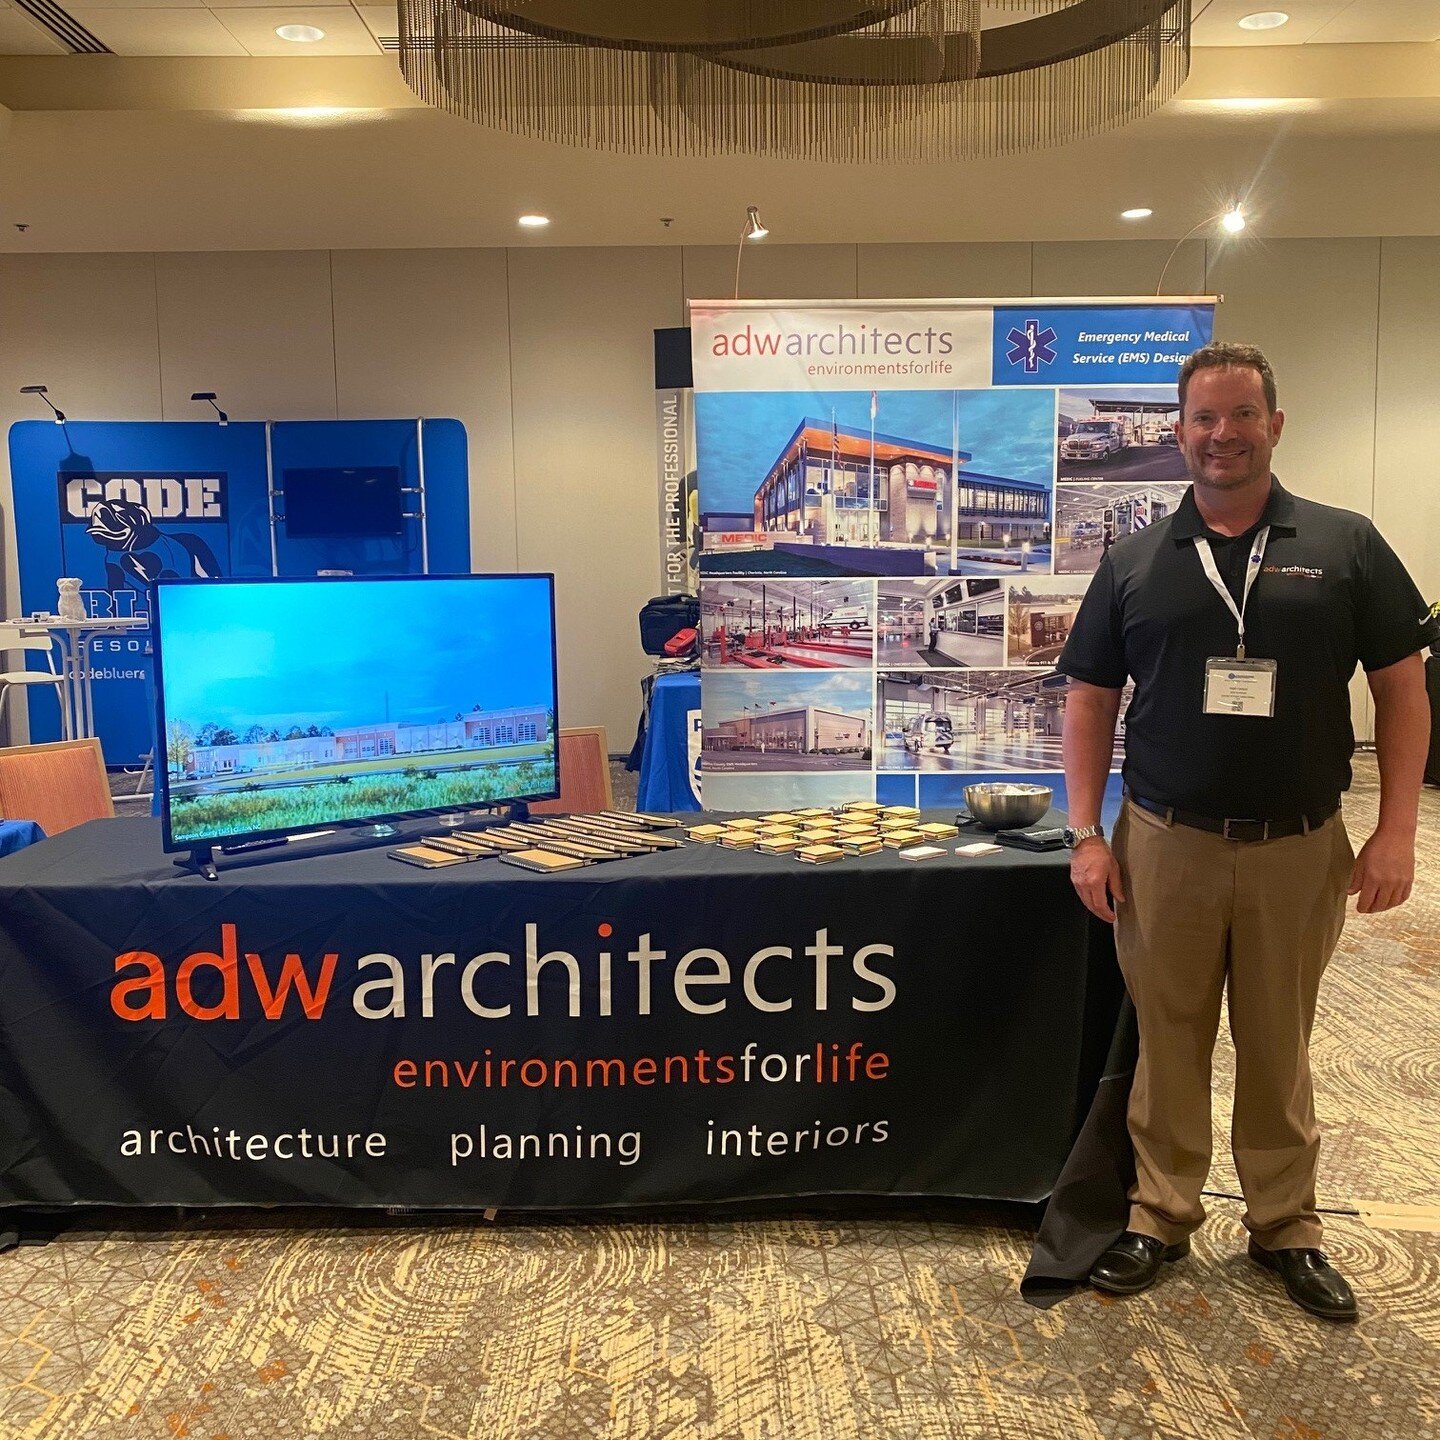 Our own Keith Carlyon, ADW's Director of Public Safety, is in attendance at the NCAEMSA Conference in Asheville today and tomorrow. Stop by our booth and tell him hi!

#adwarchitects #environmentsforlife #NCAEMSA #EMS